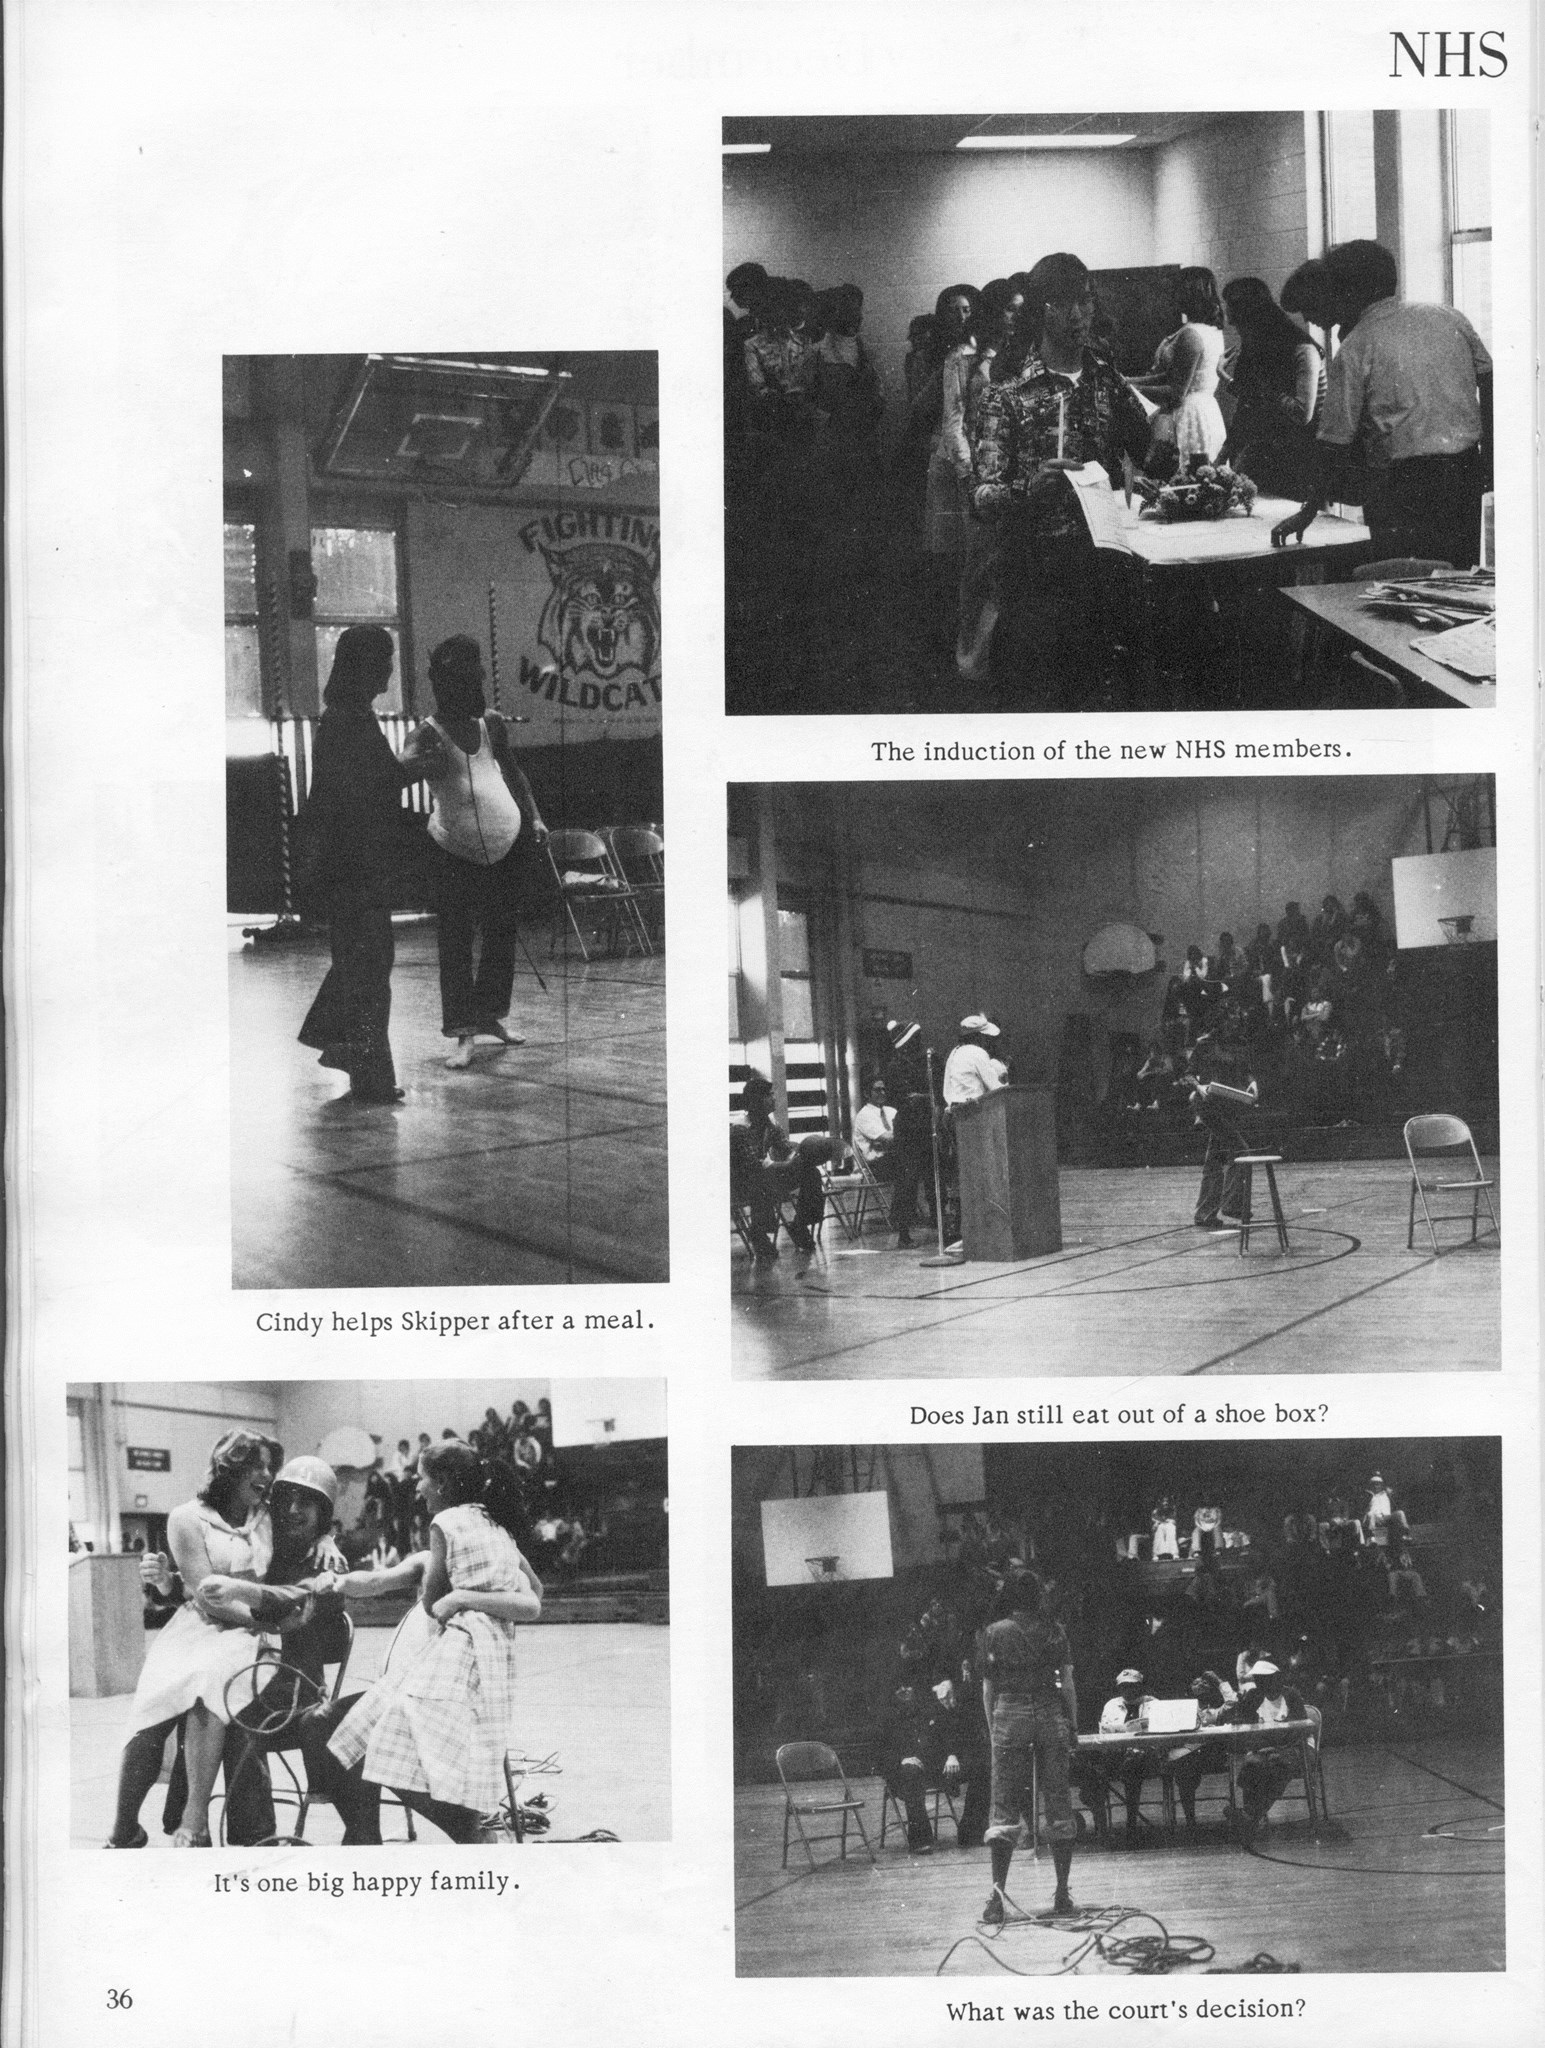 ../../../Images/Large/1977/Arclight-1977-pg0036.jpg